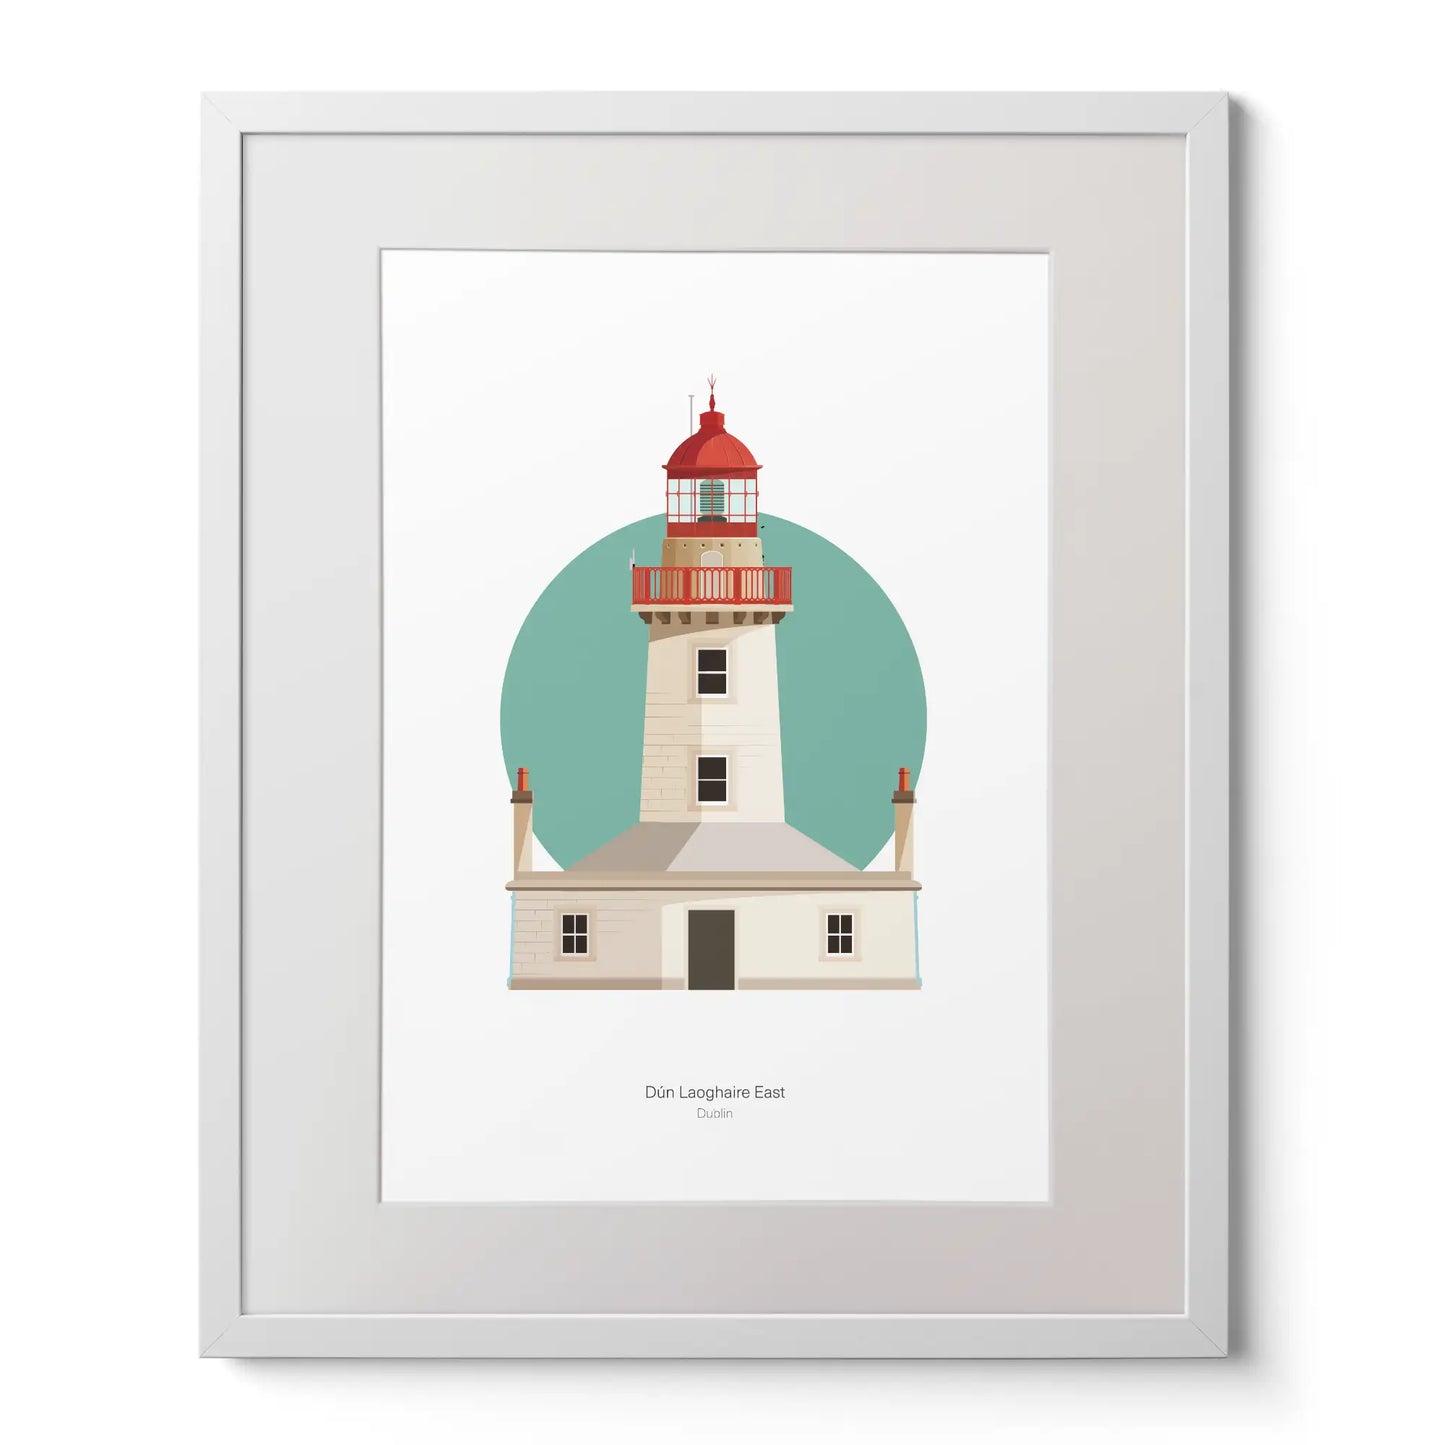 Illustration of Dún Laoghaire East lighthouse on a white background inside light blue square,  in a white frame measuring 40x50cm.